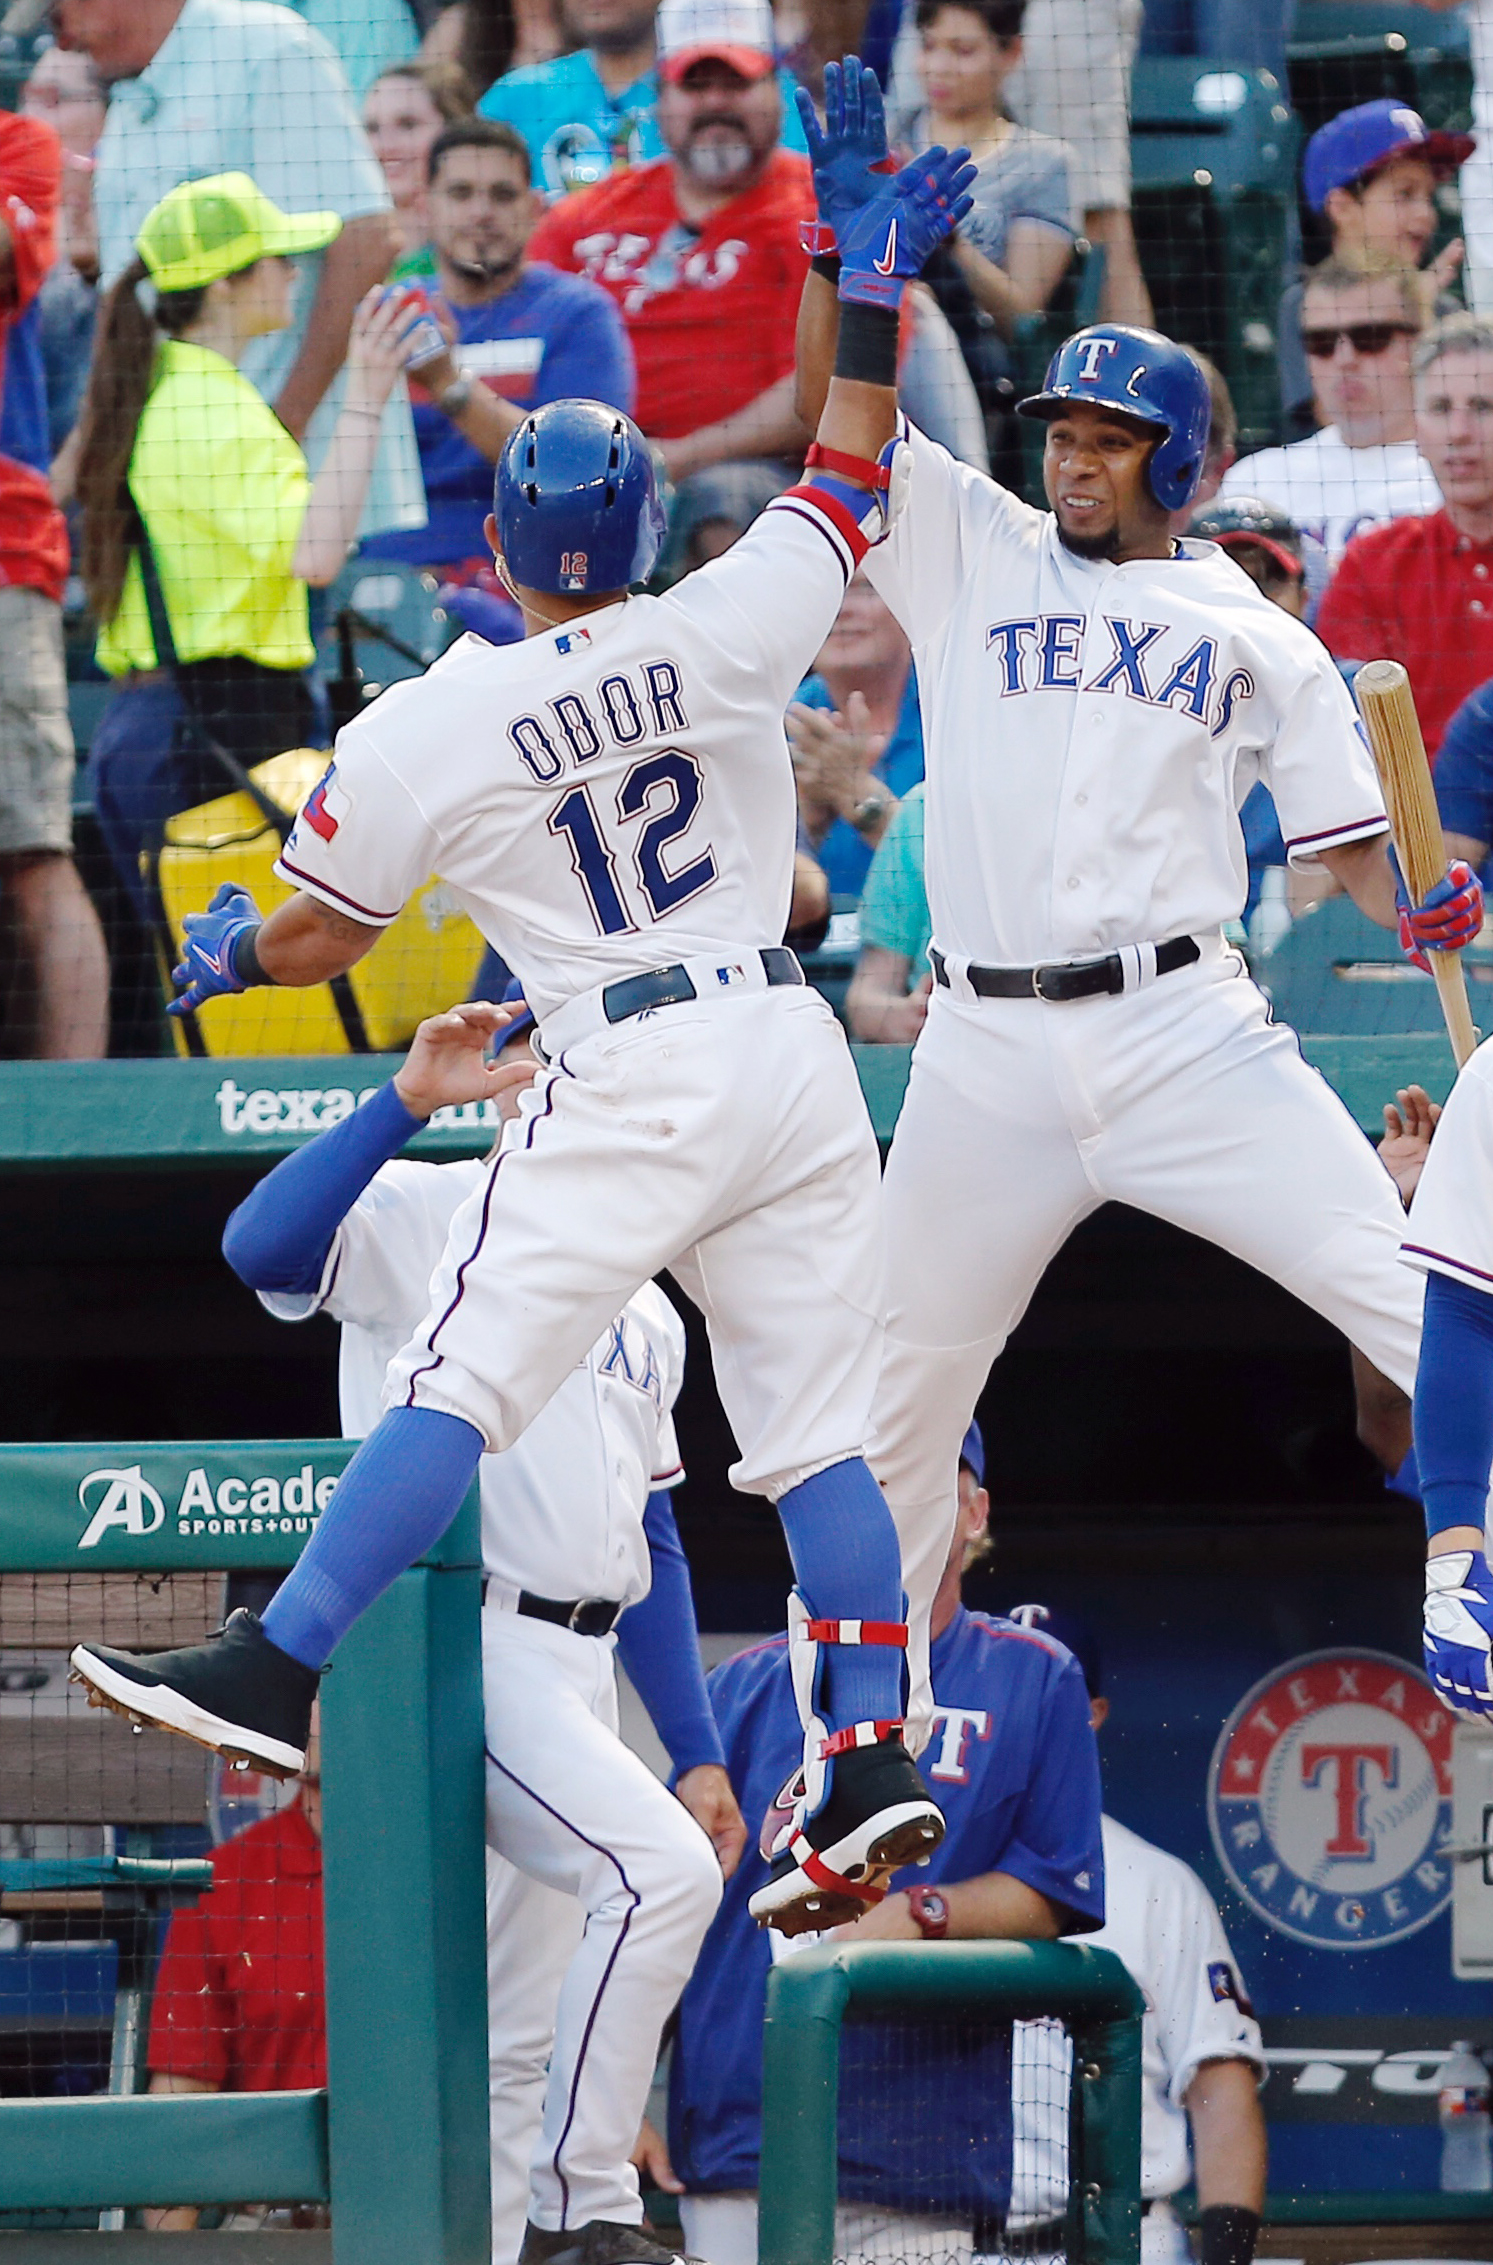 Rougned Odor's suspension reduced to 7 games